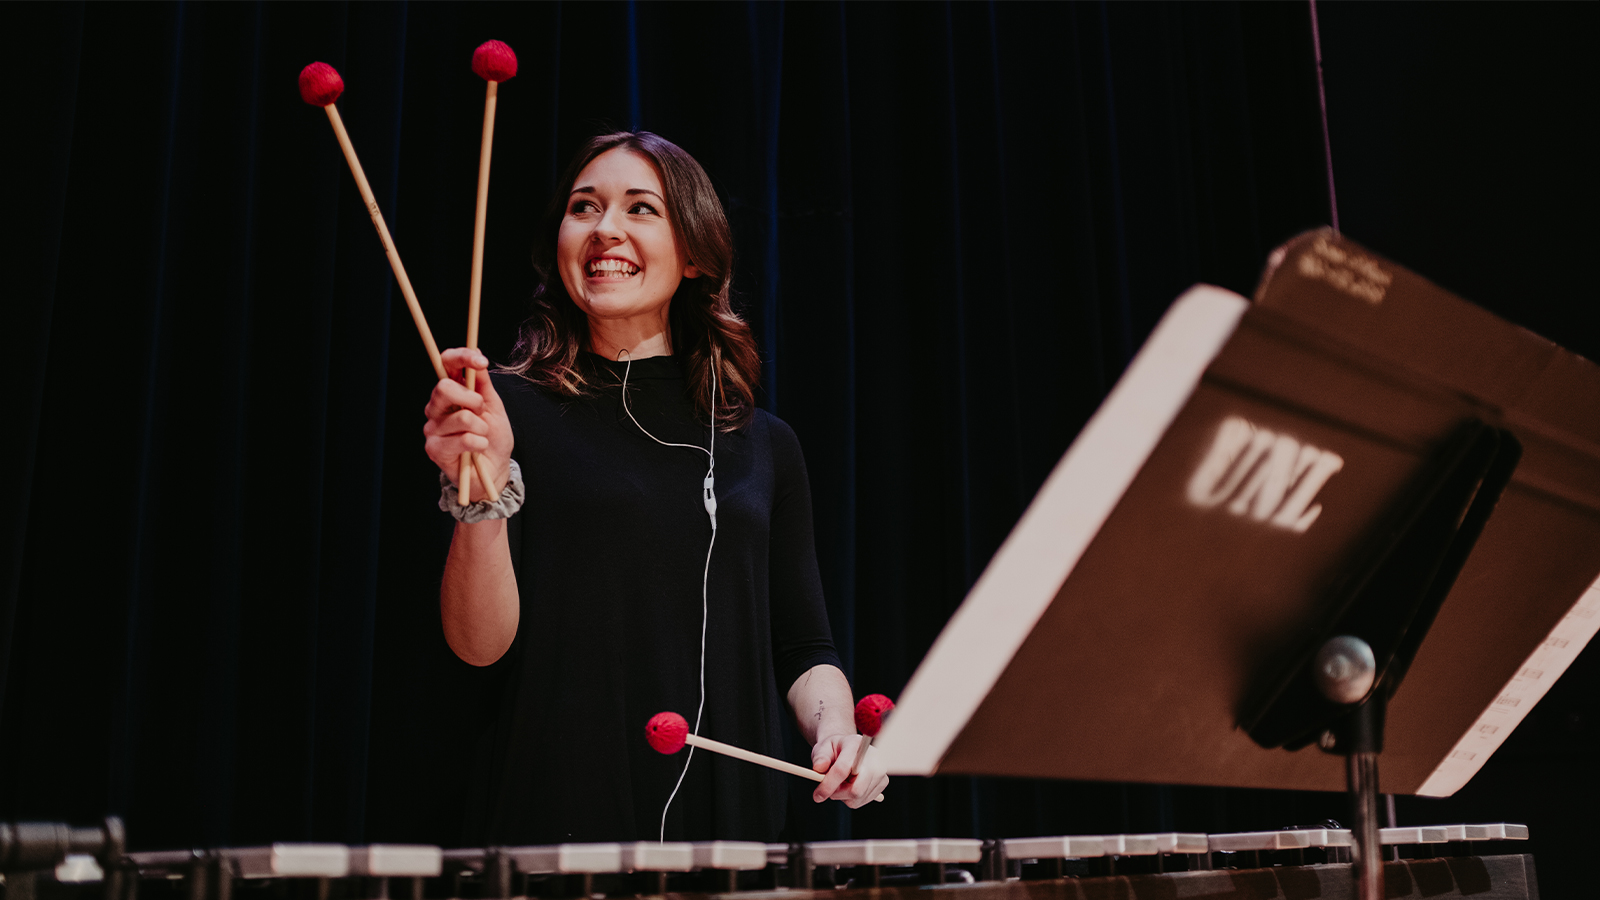 A student smiles while holding mallets